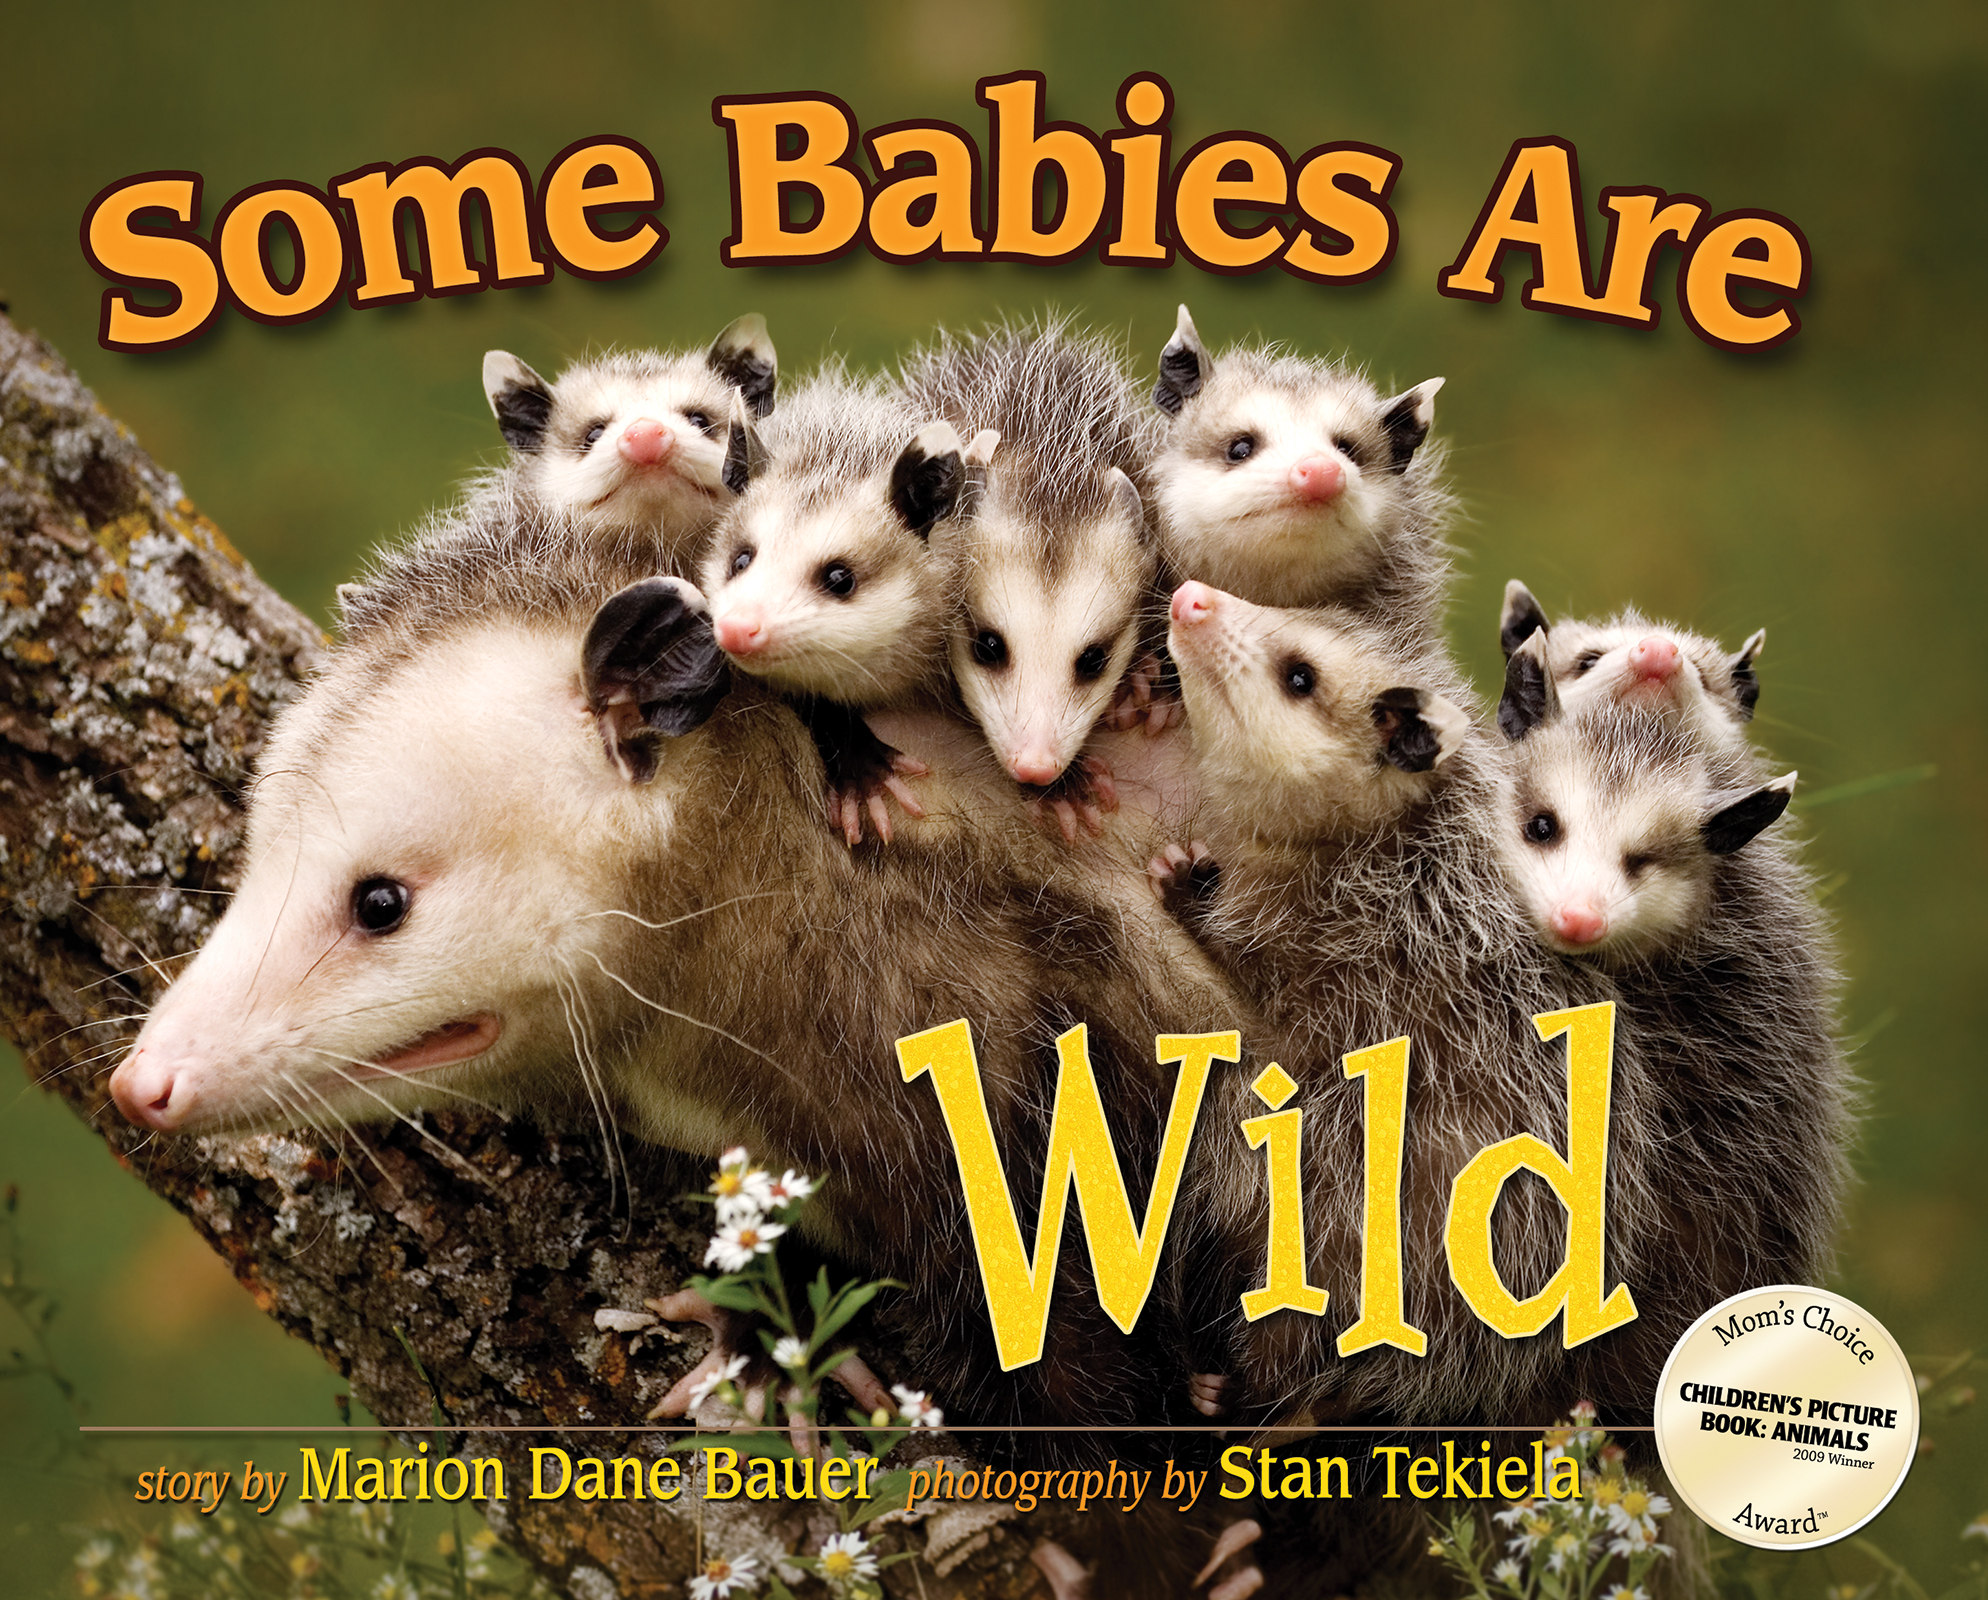 Some Babies Are Wild